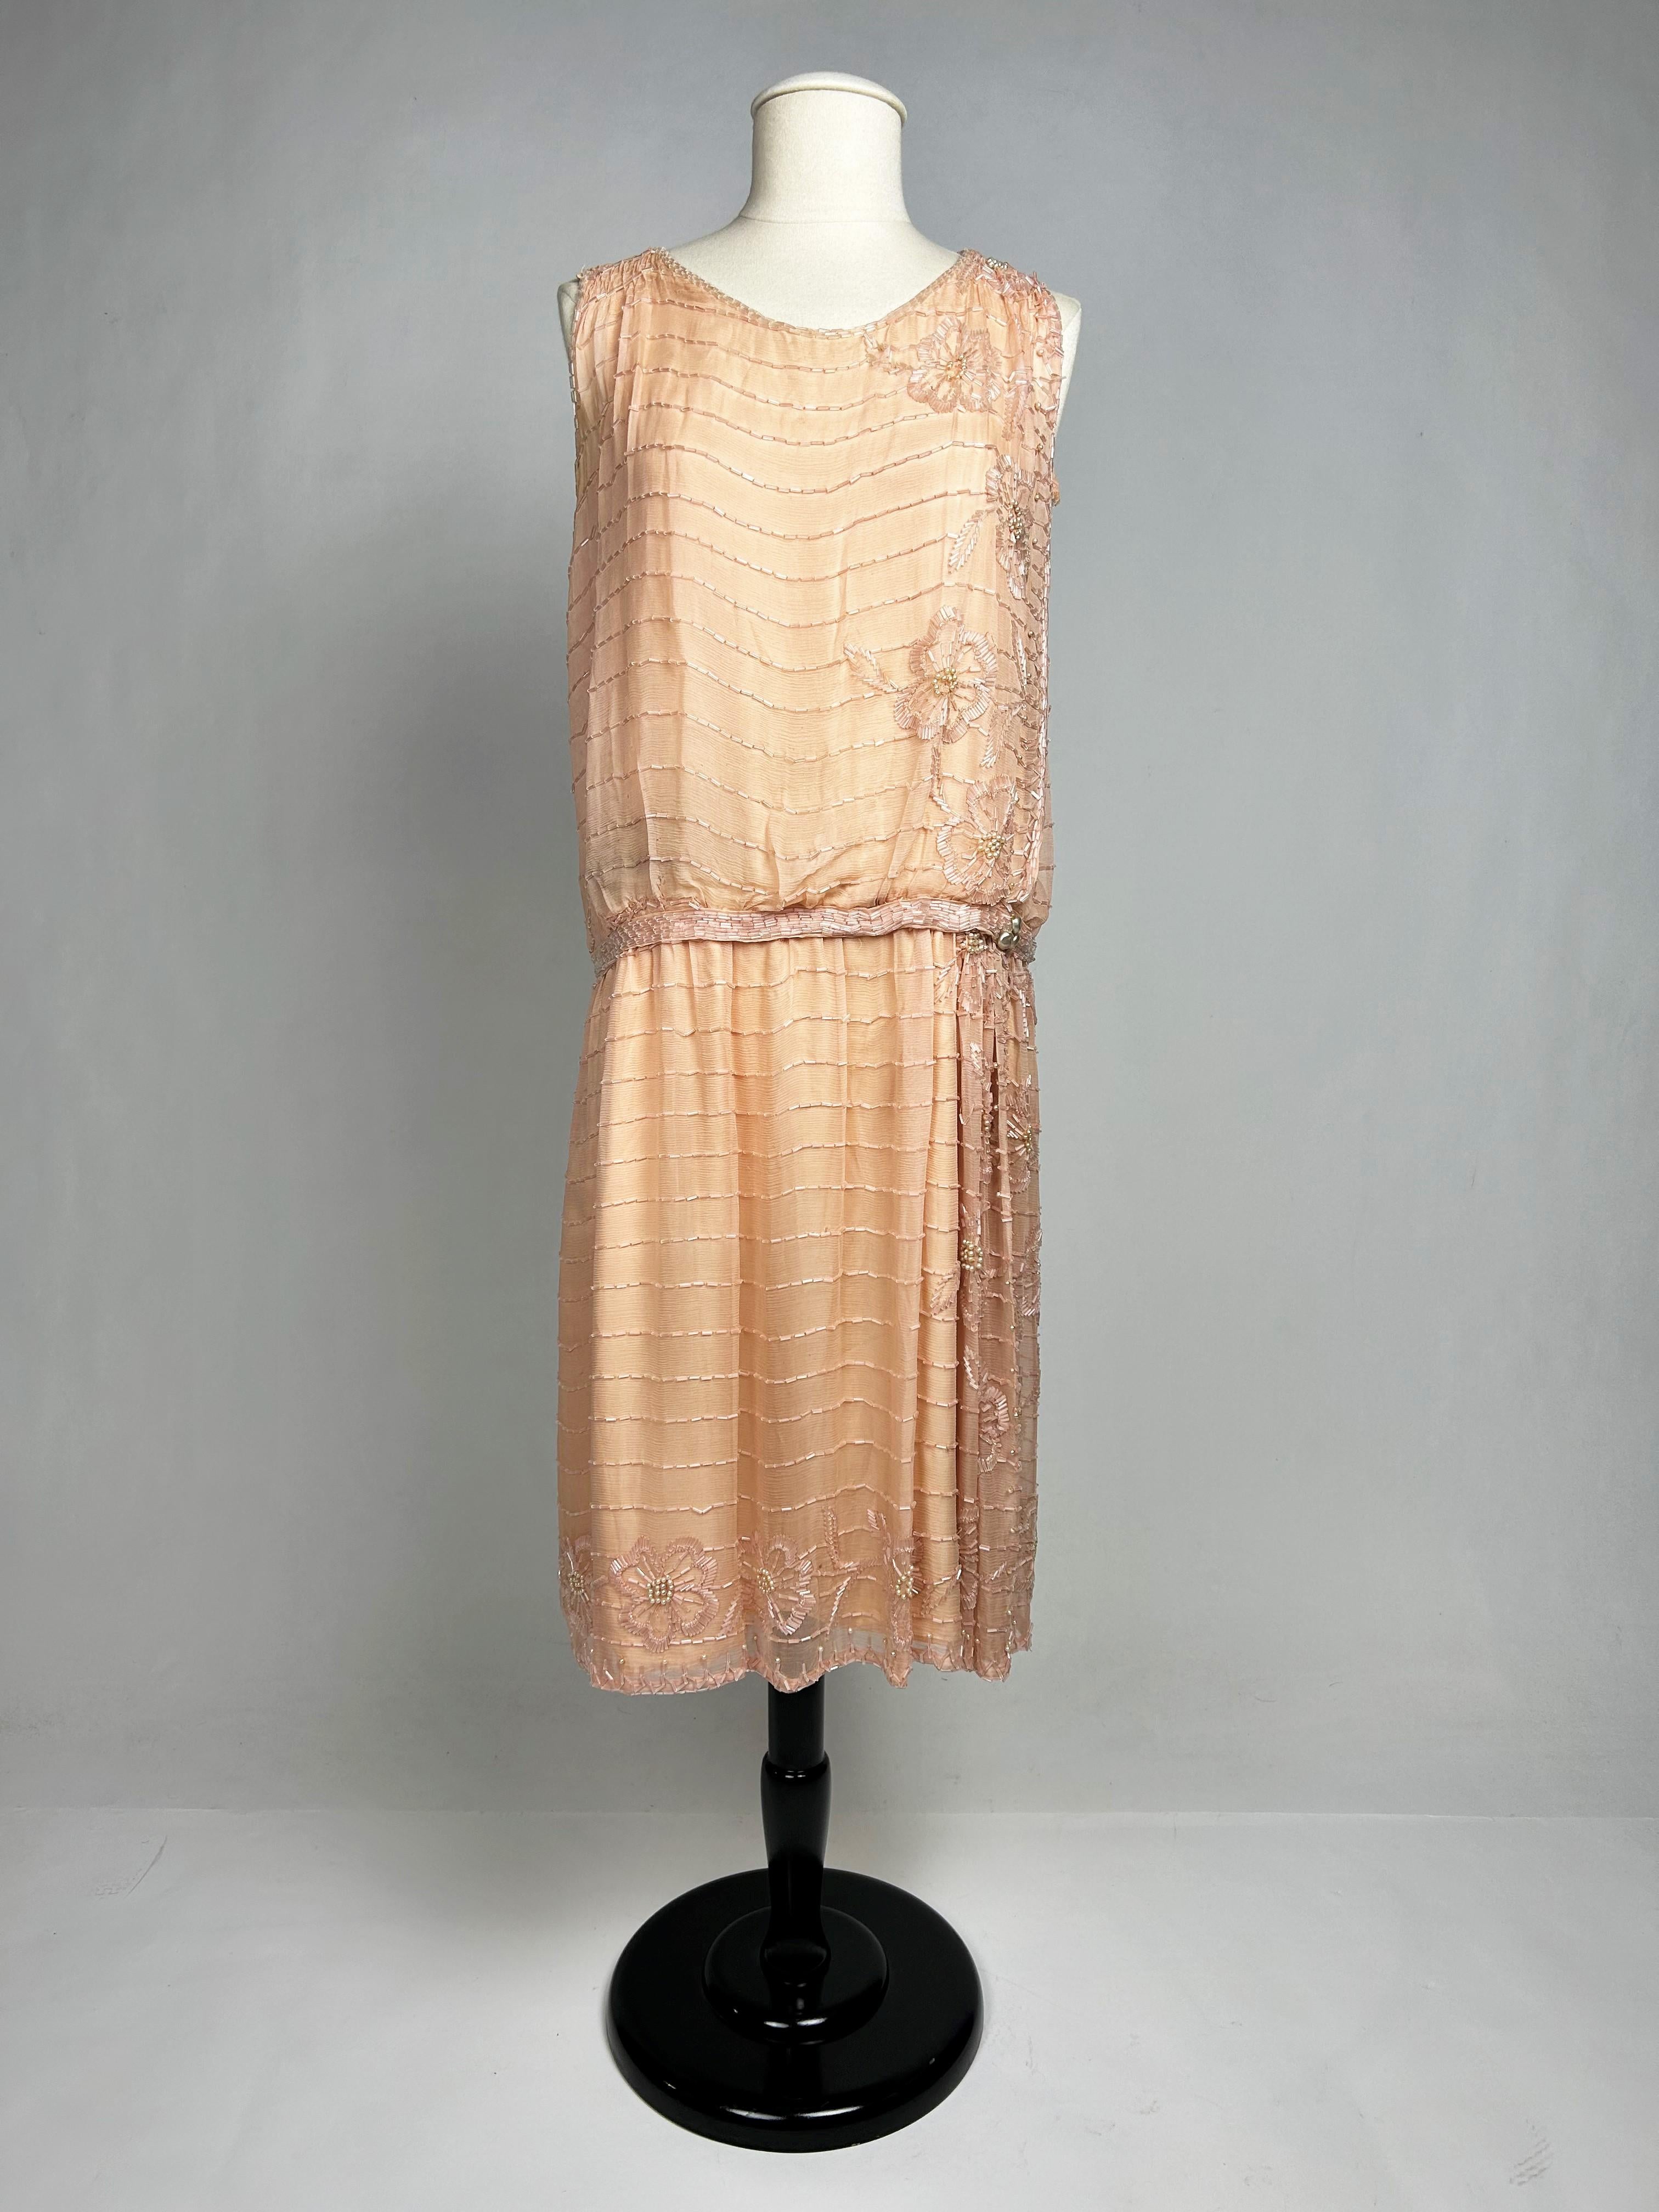 A Salmon embroidered Chiffon Flapper Dress - France Circa 1925 For Sale 1